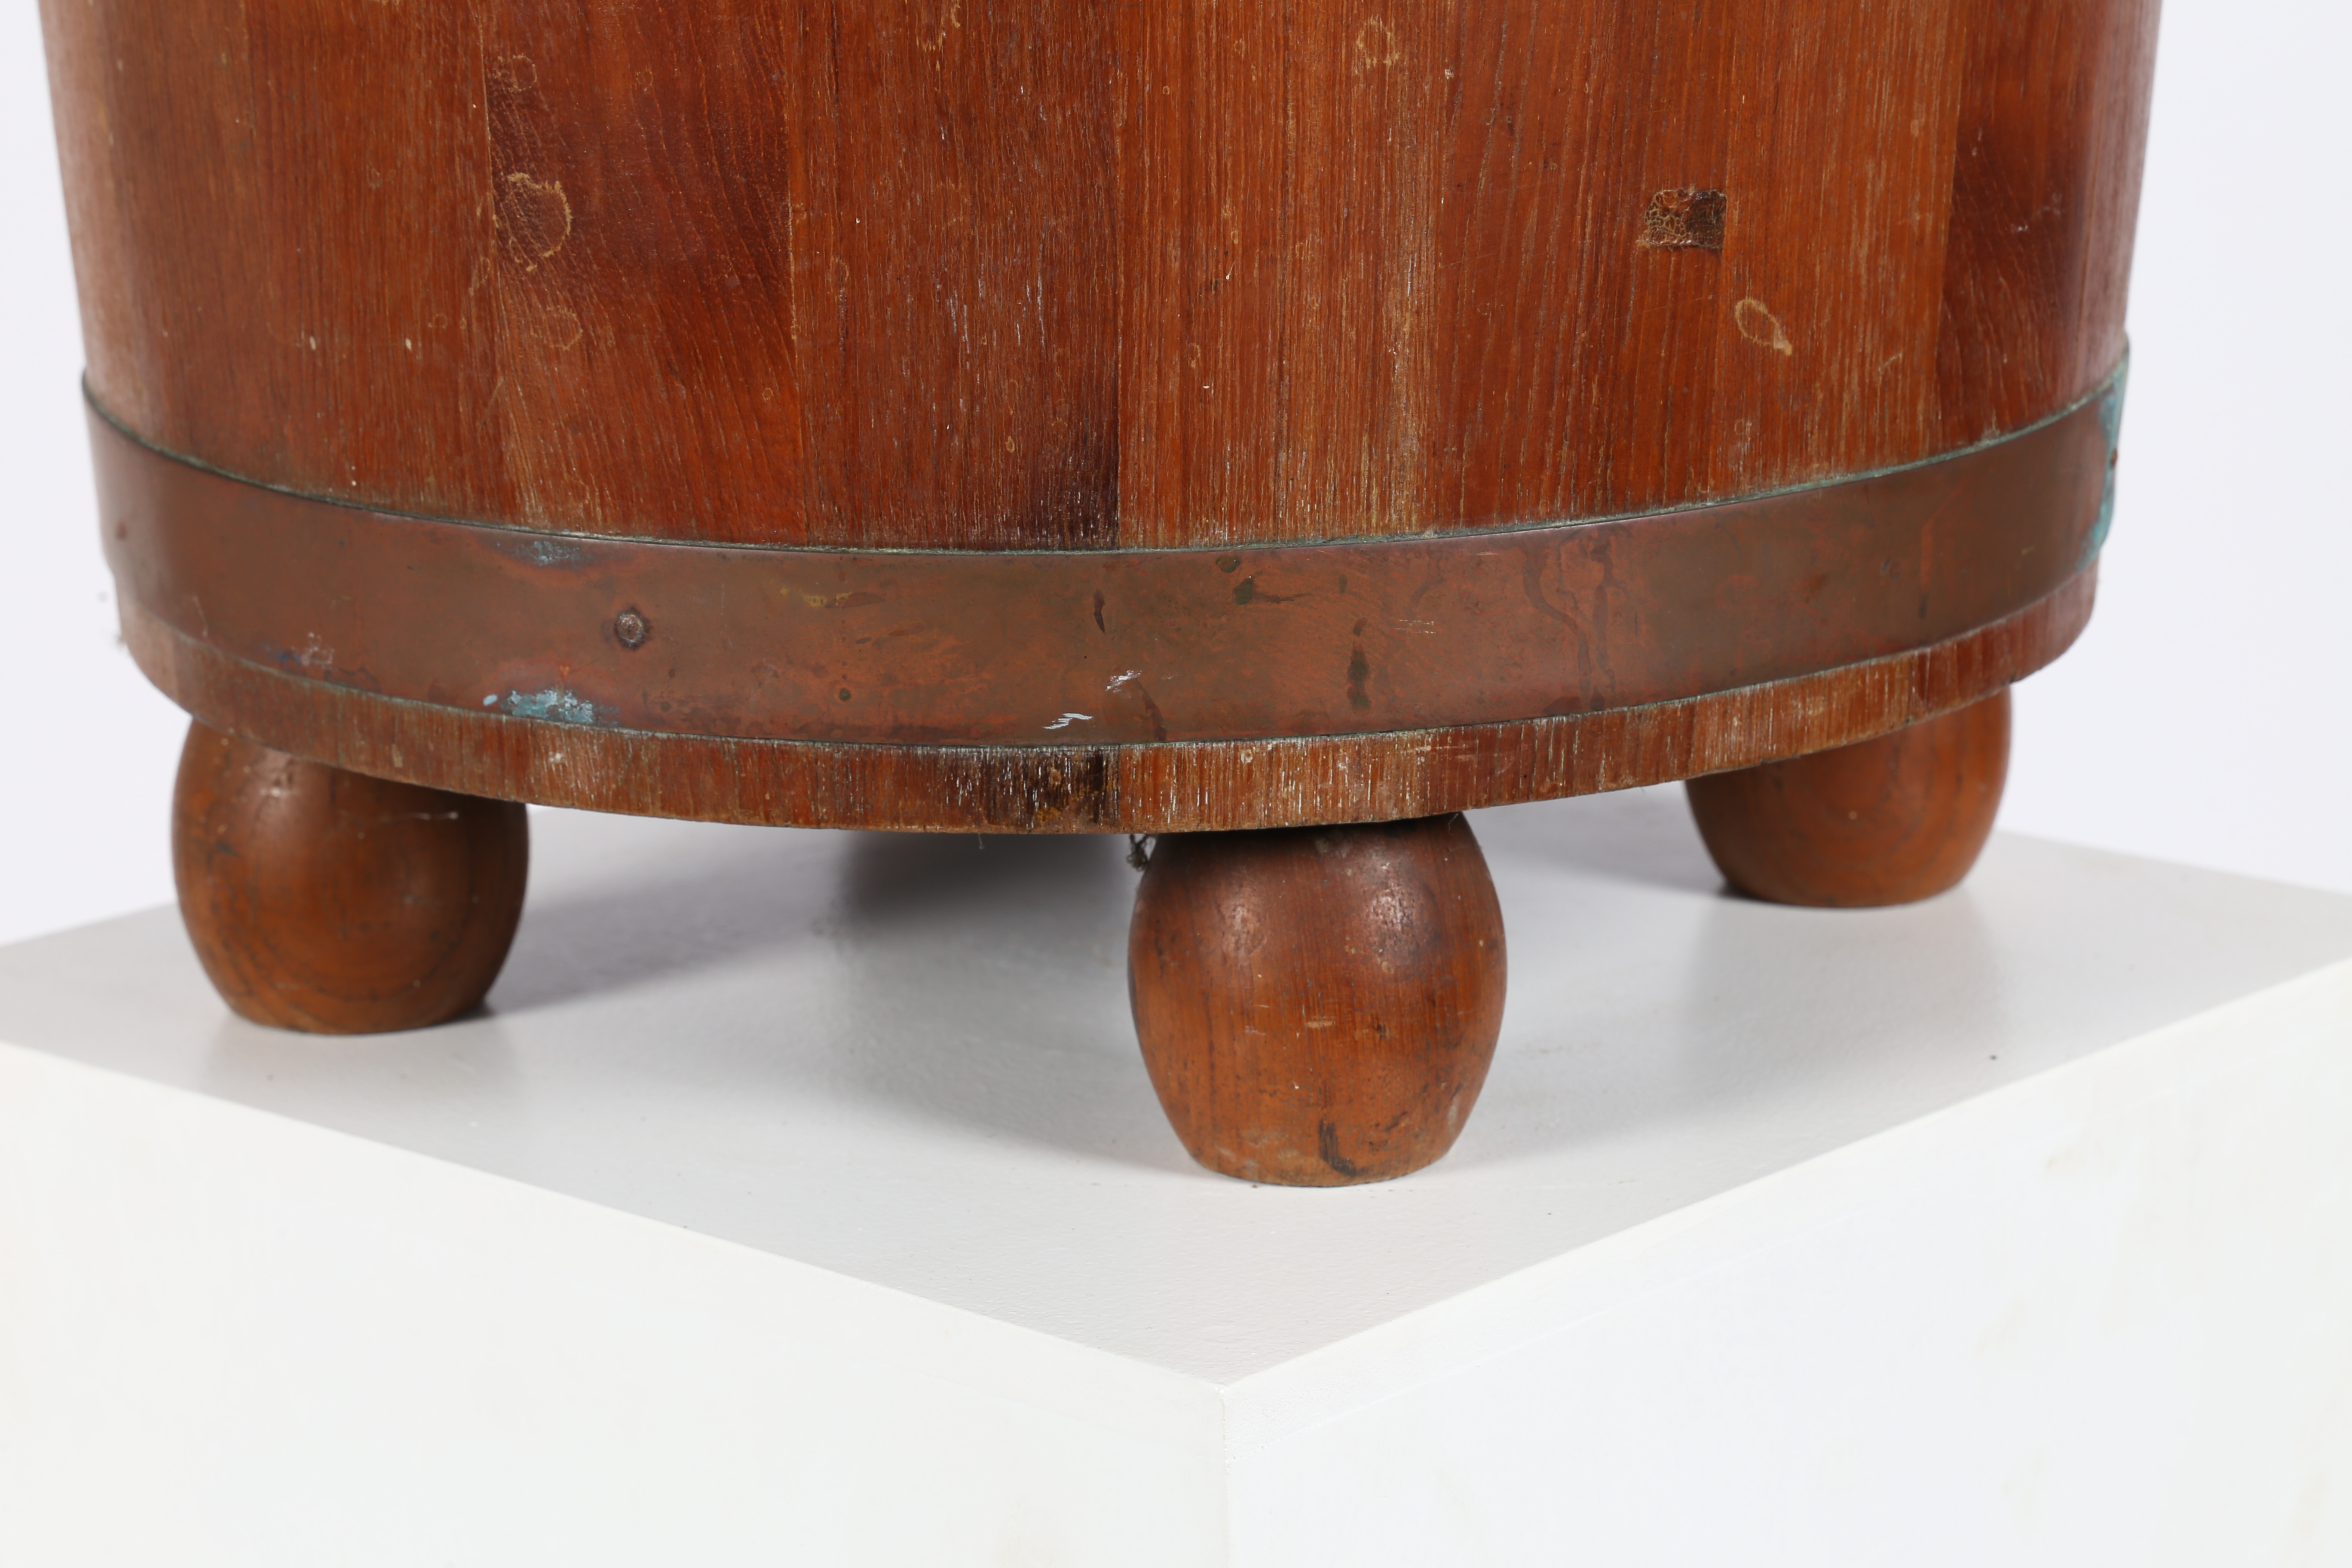 A TEAK AND COPPER BOUND BUCKET, PROBABLY MADE FROM THE TIMBER OF AN OLD SHIP. - Image 3 of 7